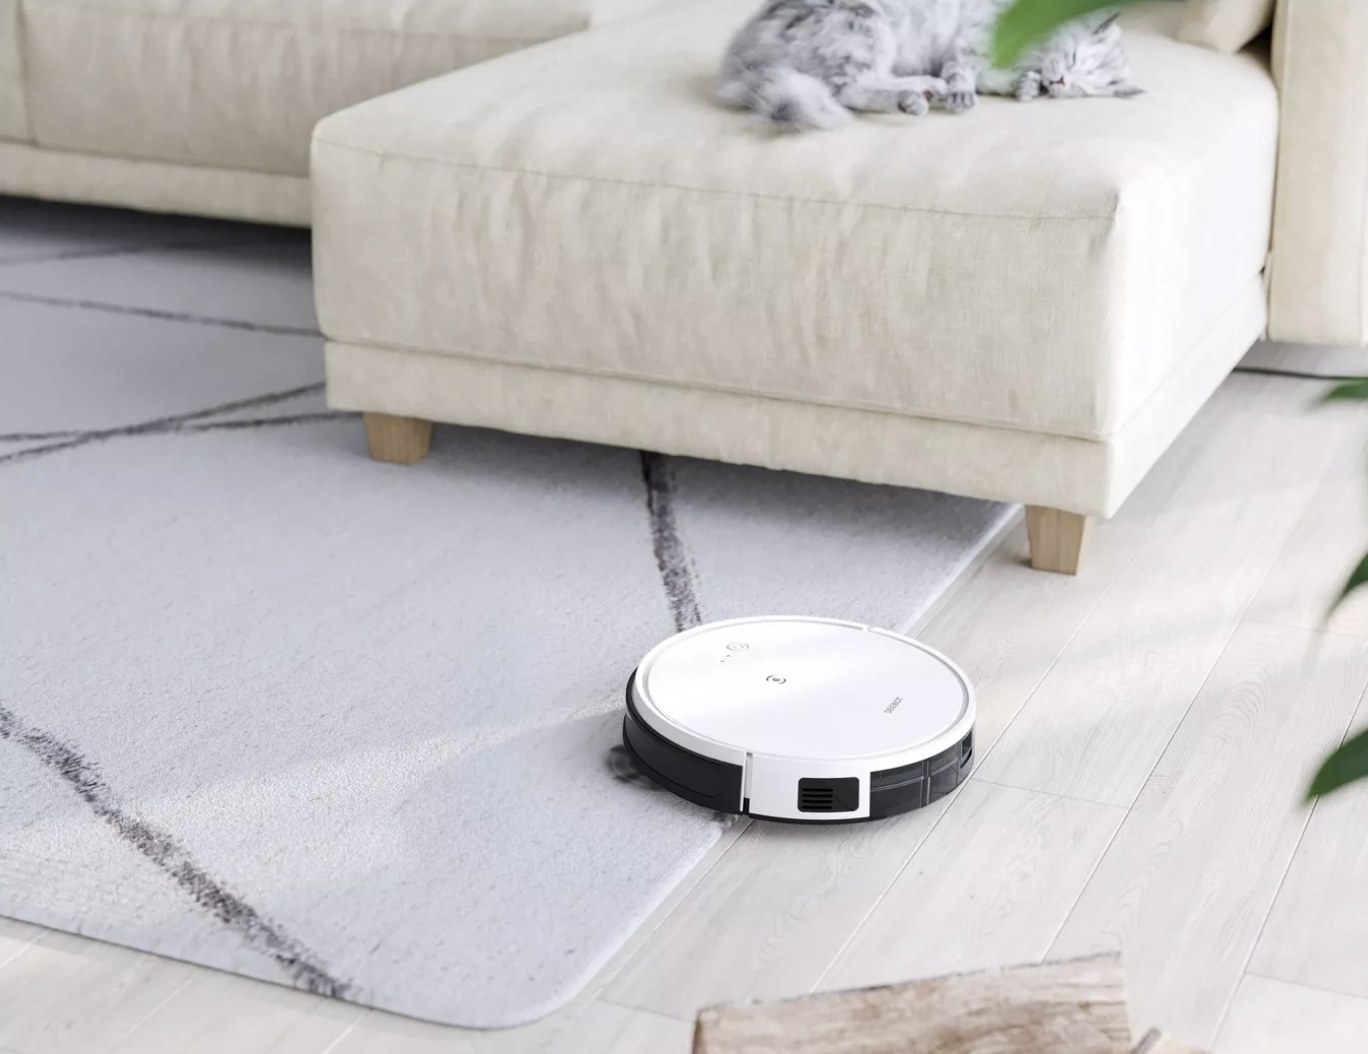 A robotic mop and vacuum cleaner in a living room